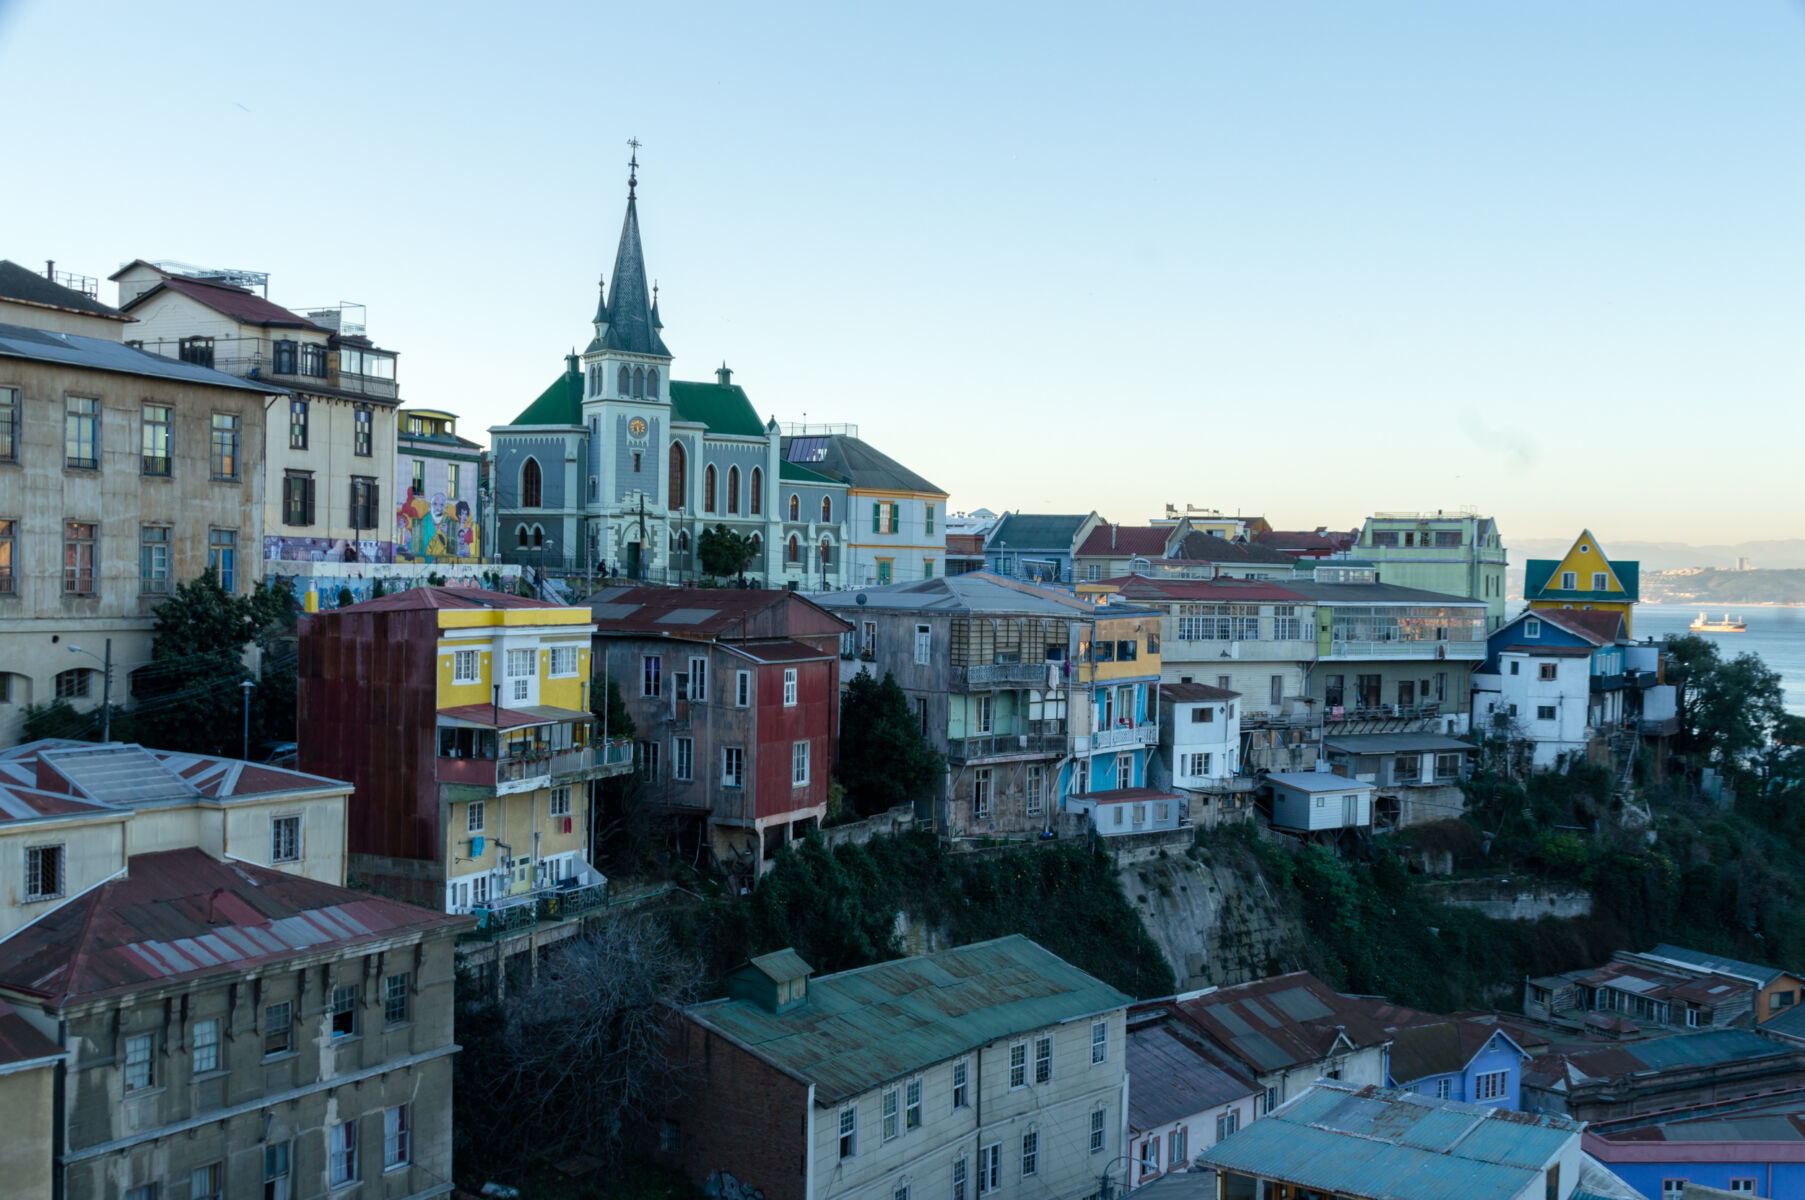 The skyline of colourful Valparaiso, an easy day trip from Santiago, Chile